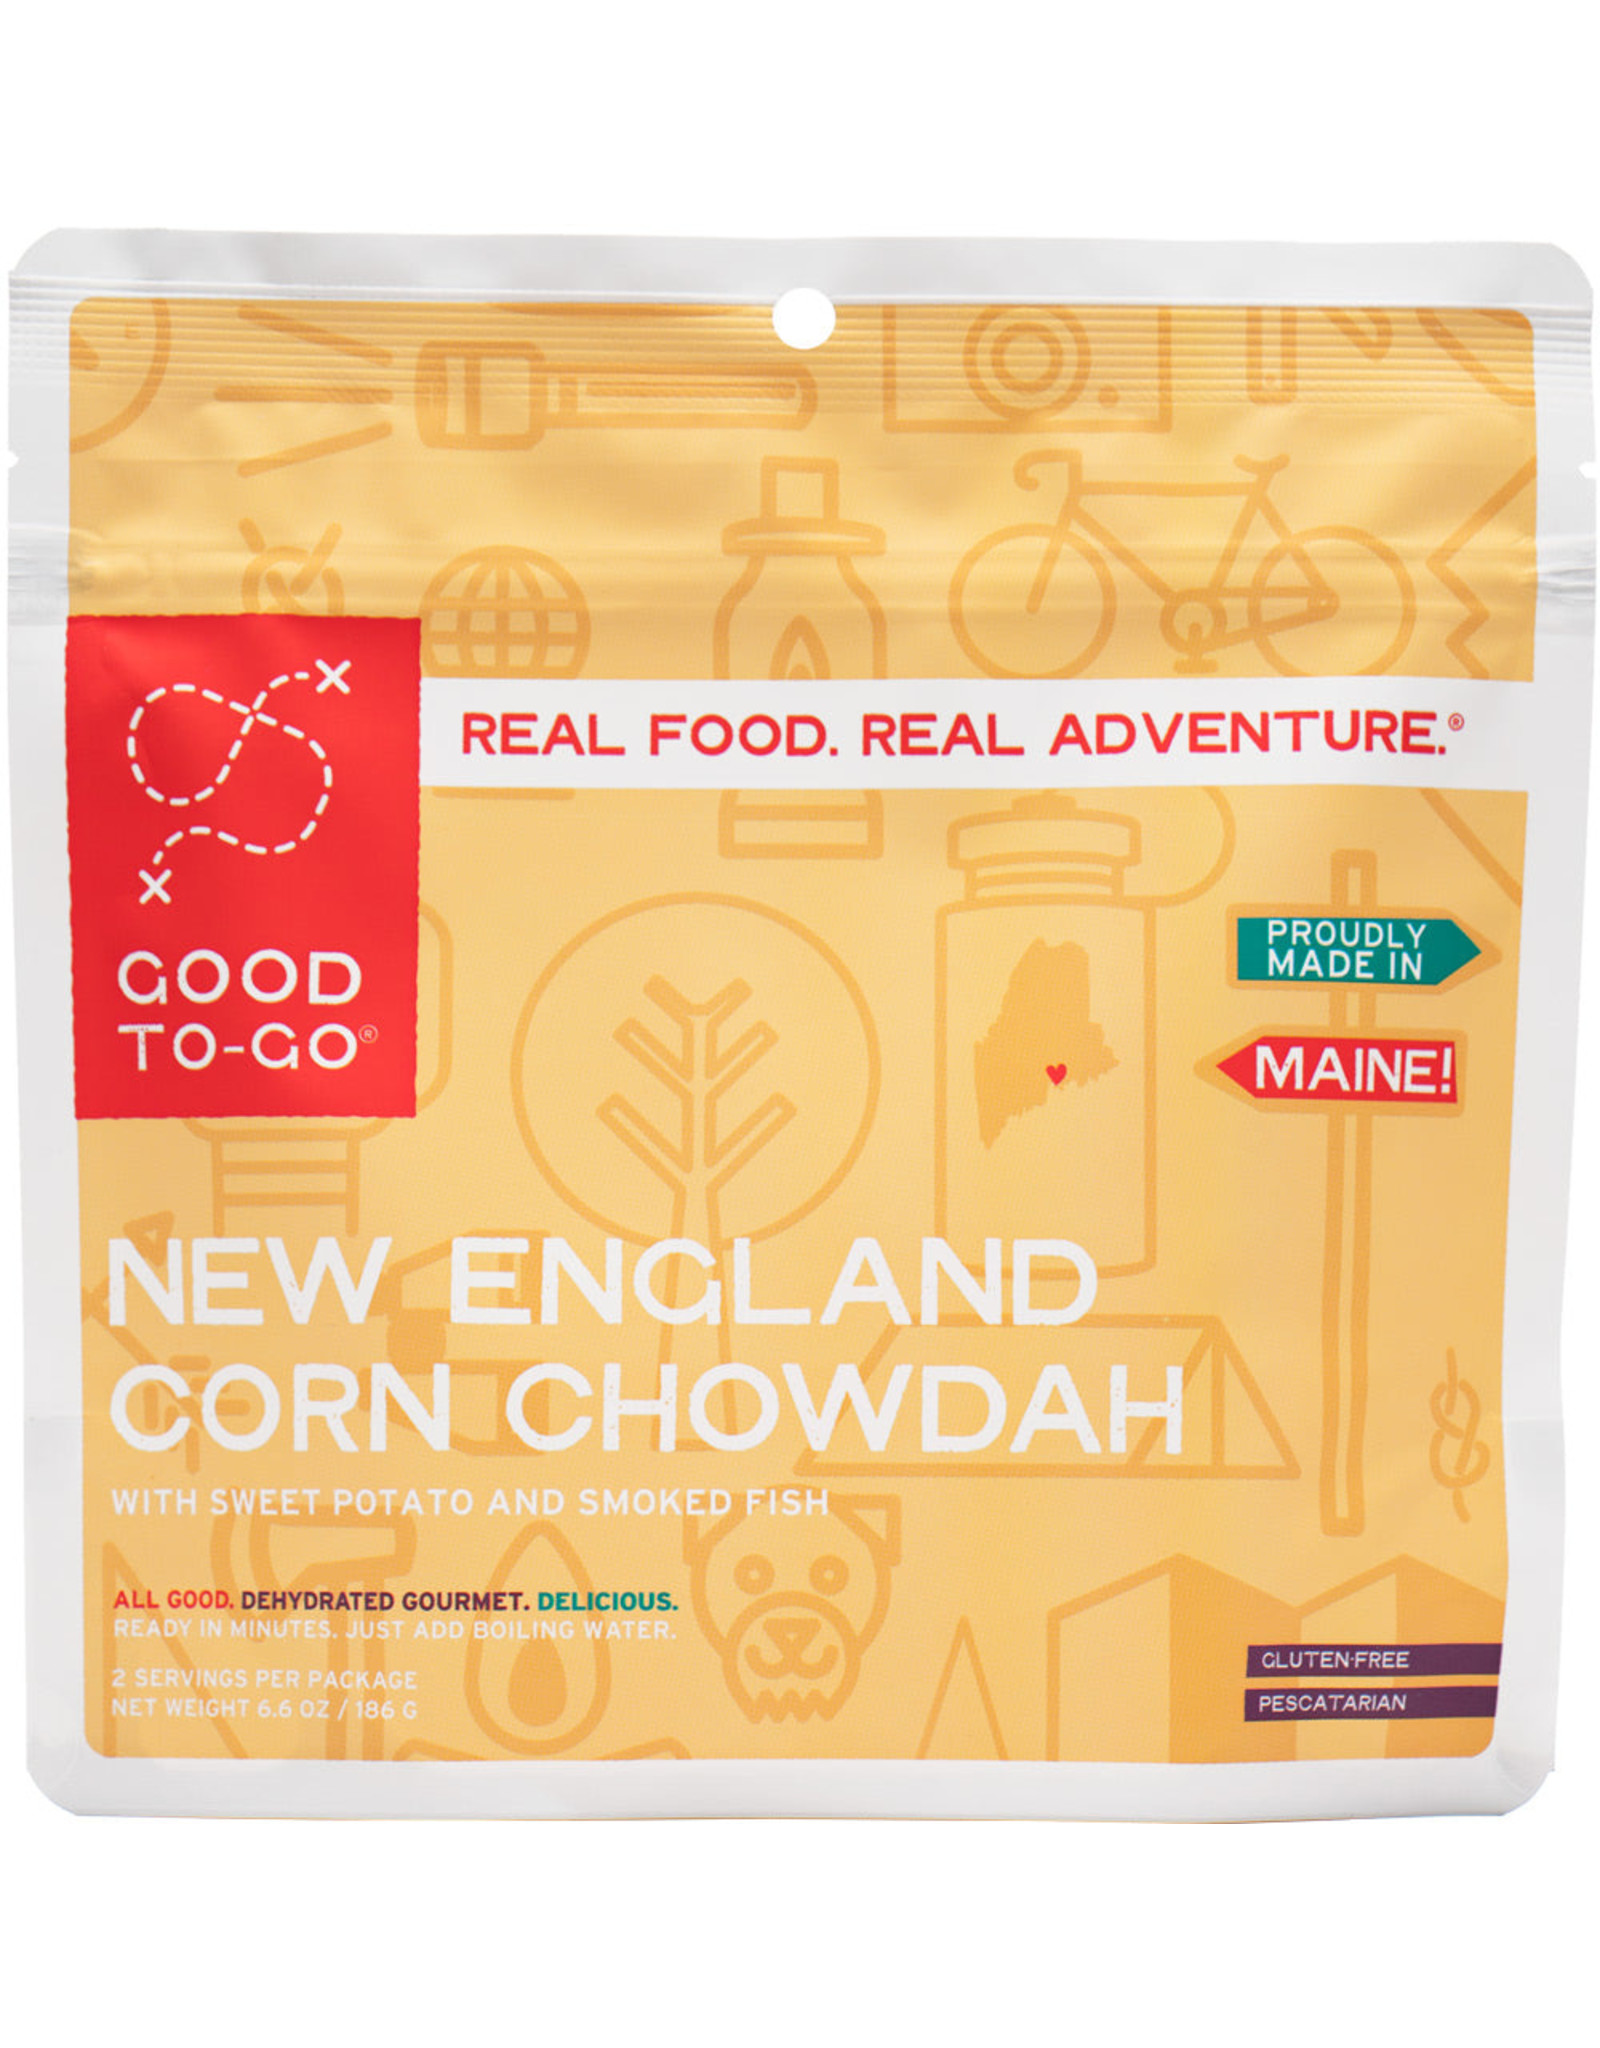 Good to Go Good-To-Go - Double, New England Corn Chowder